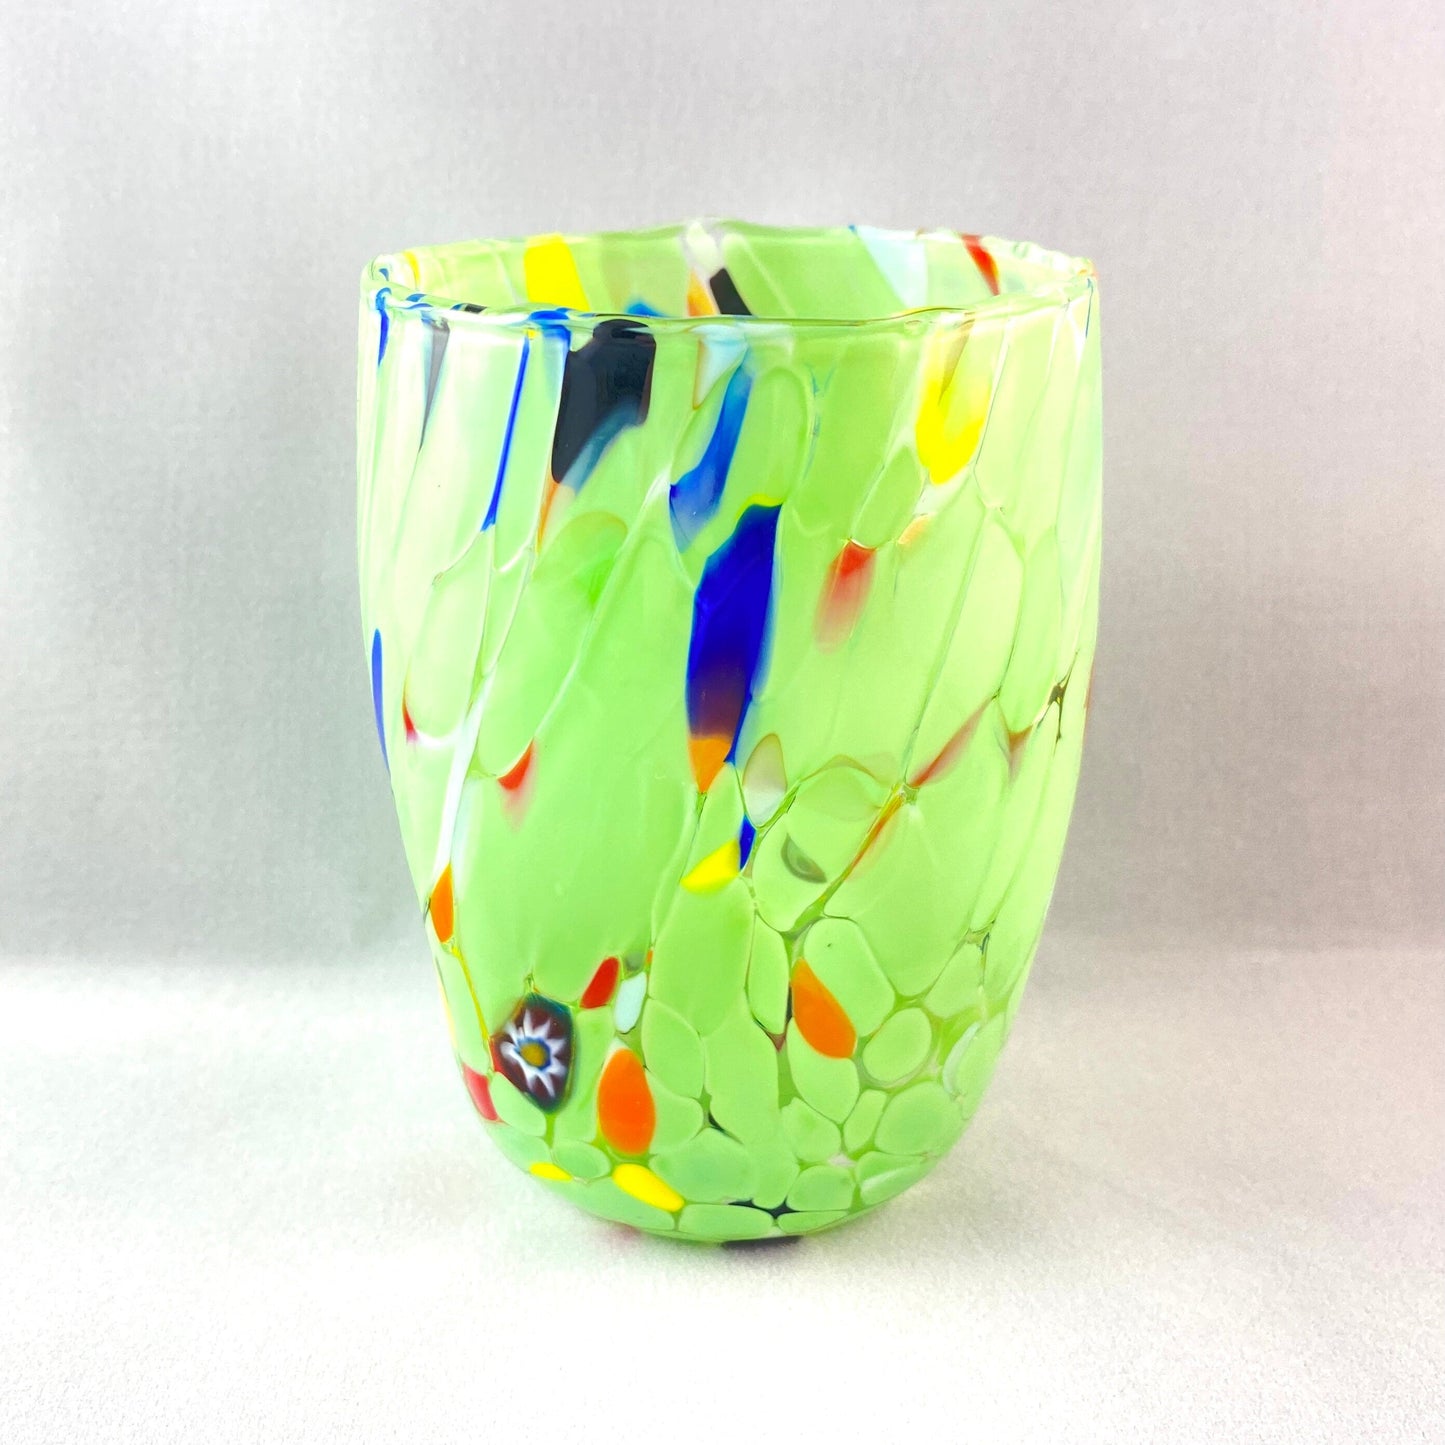 Lime Green Venetian Glass Drinking Glass - Handmade in Italy, Colorful Murano Glass